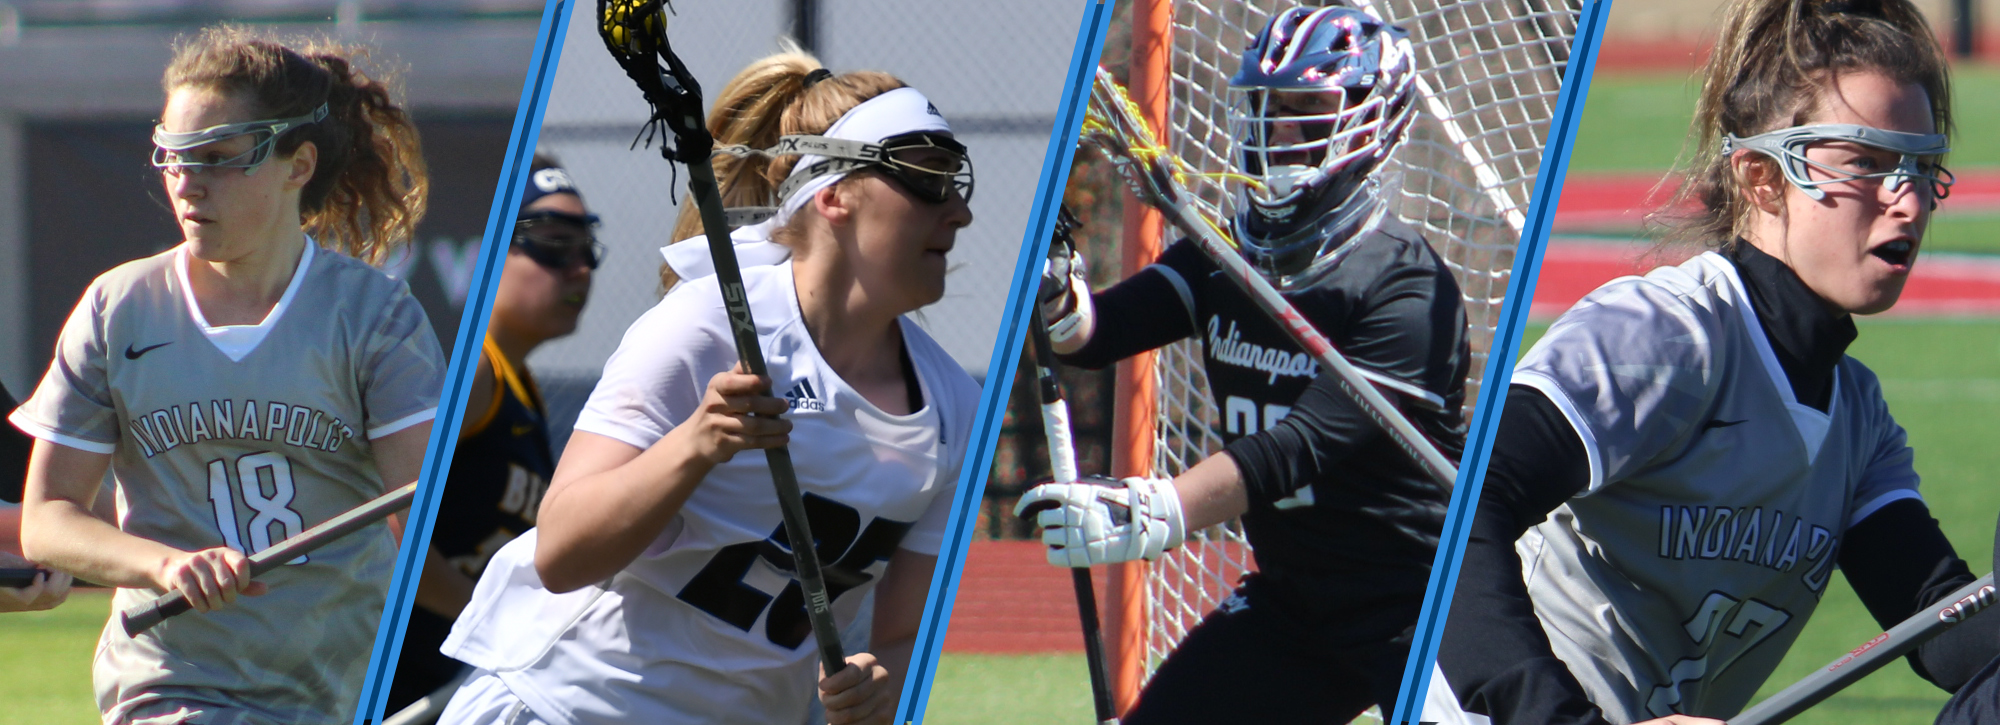 2019 Women's Lacrosse All-GLIAC Teams and special honors are announced